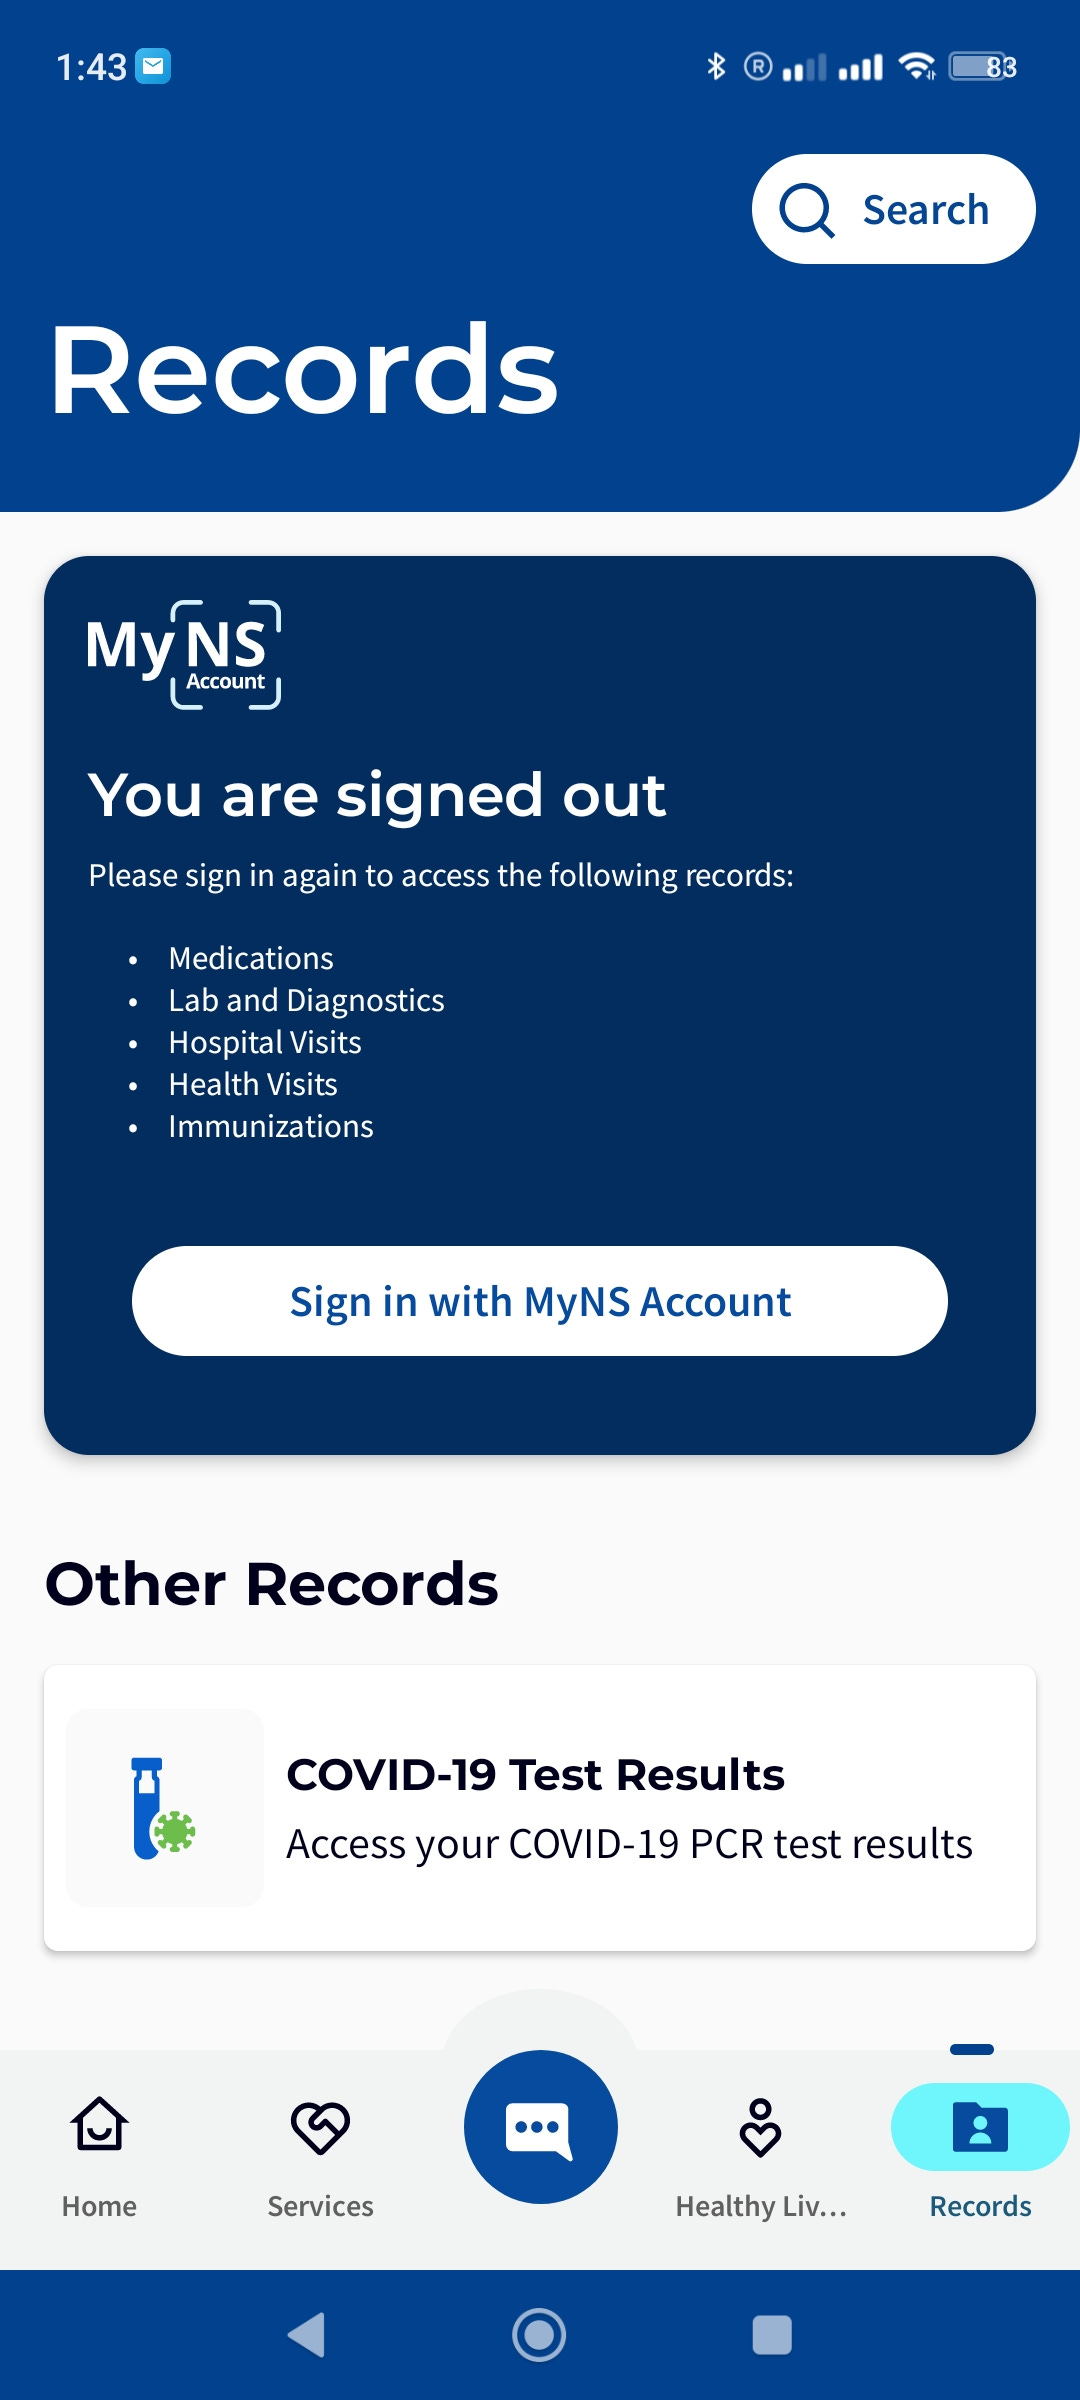 Sign in with MyNS Account